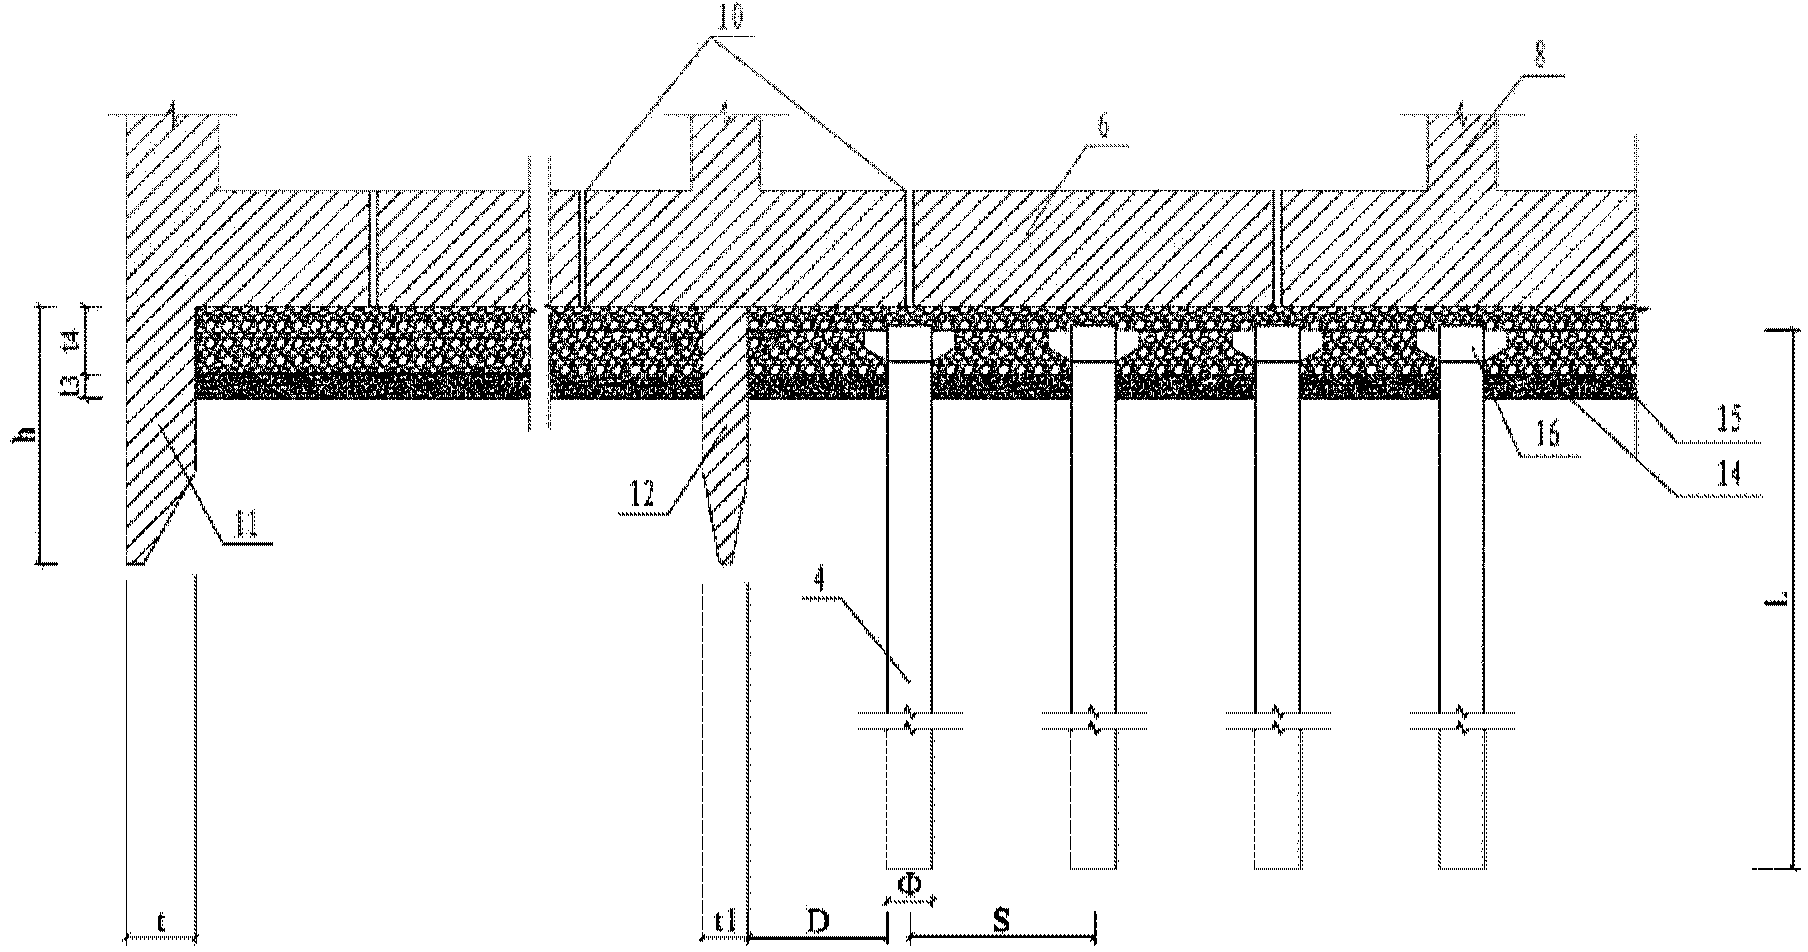 Caisson composite foundation provided with suction type apron shells and semi-rigid connection piles